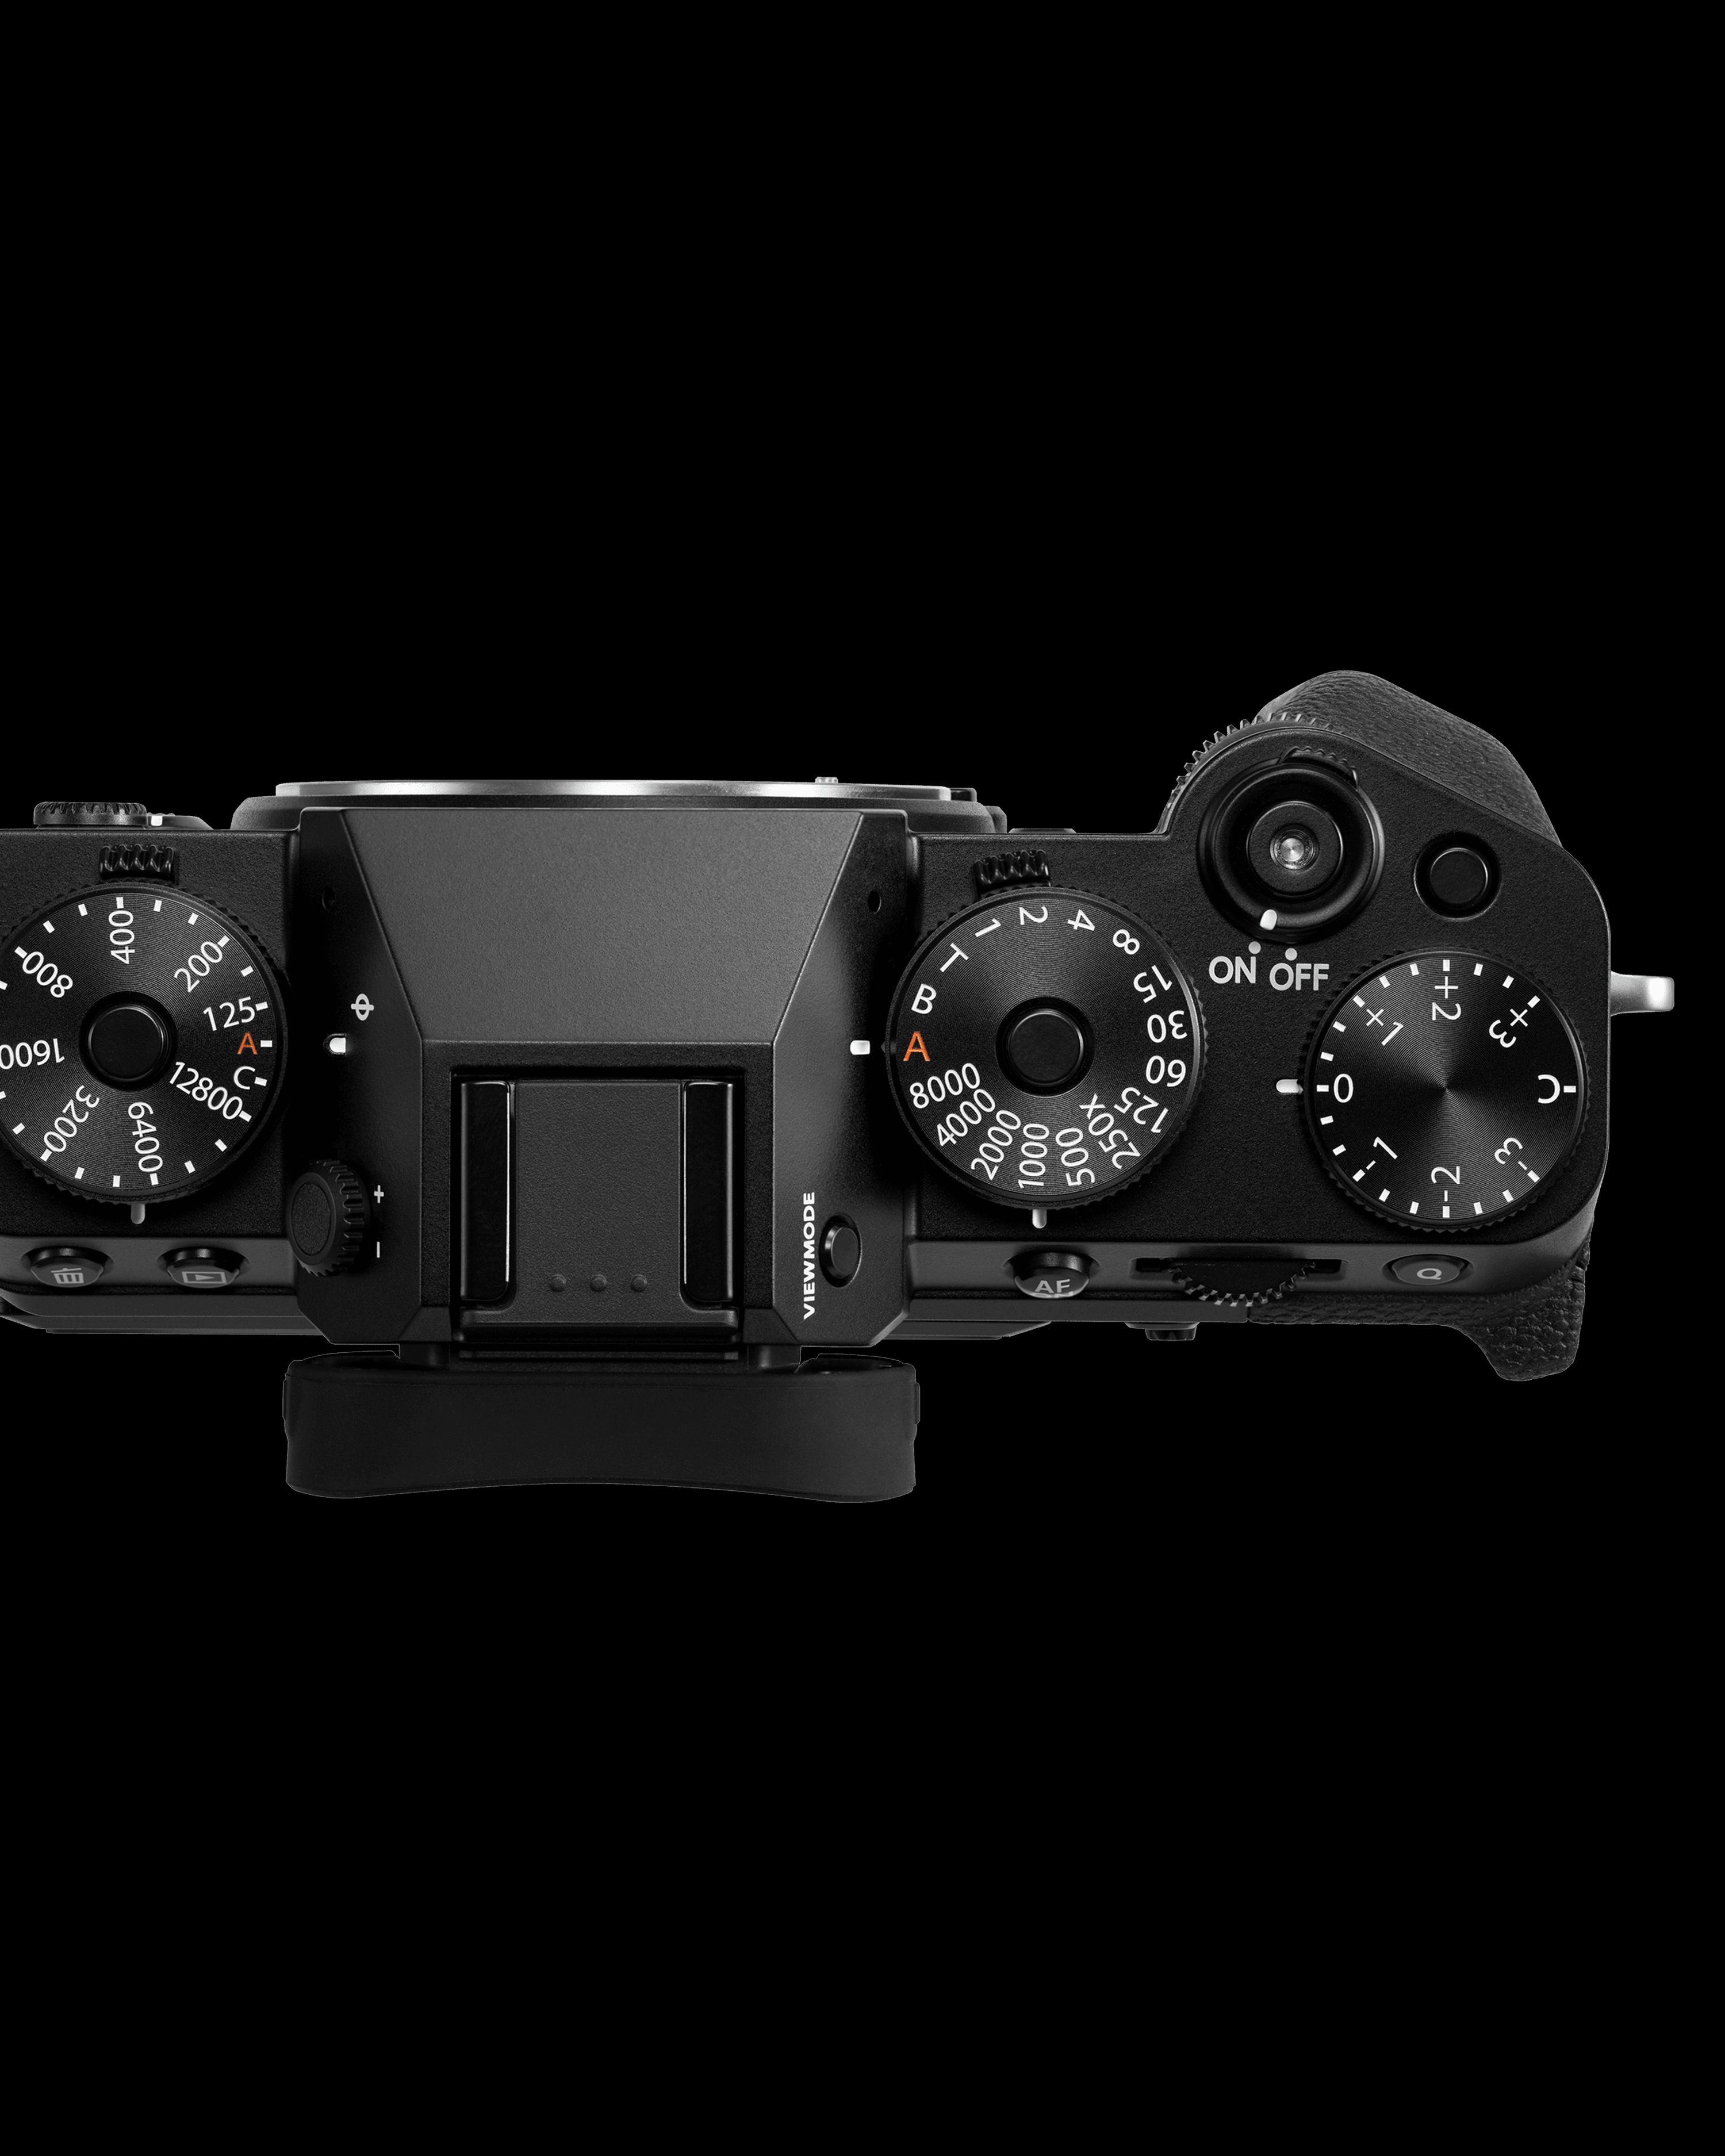 Fujifilm X-T5 Features 40.2MP (160MP High-Res Shot Mode), 0.8X